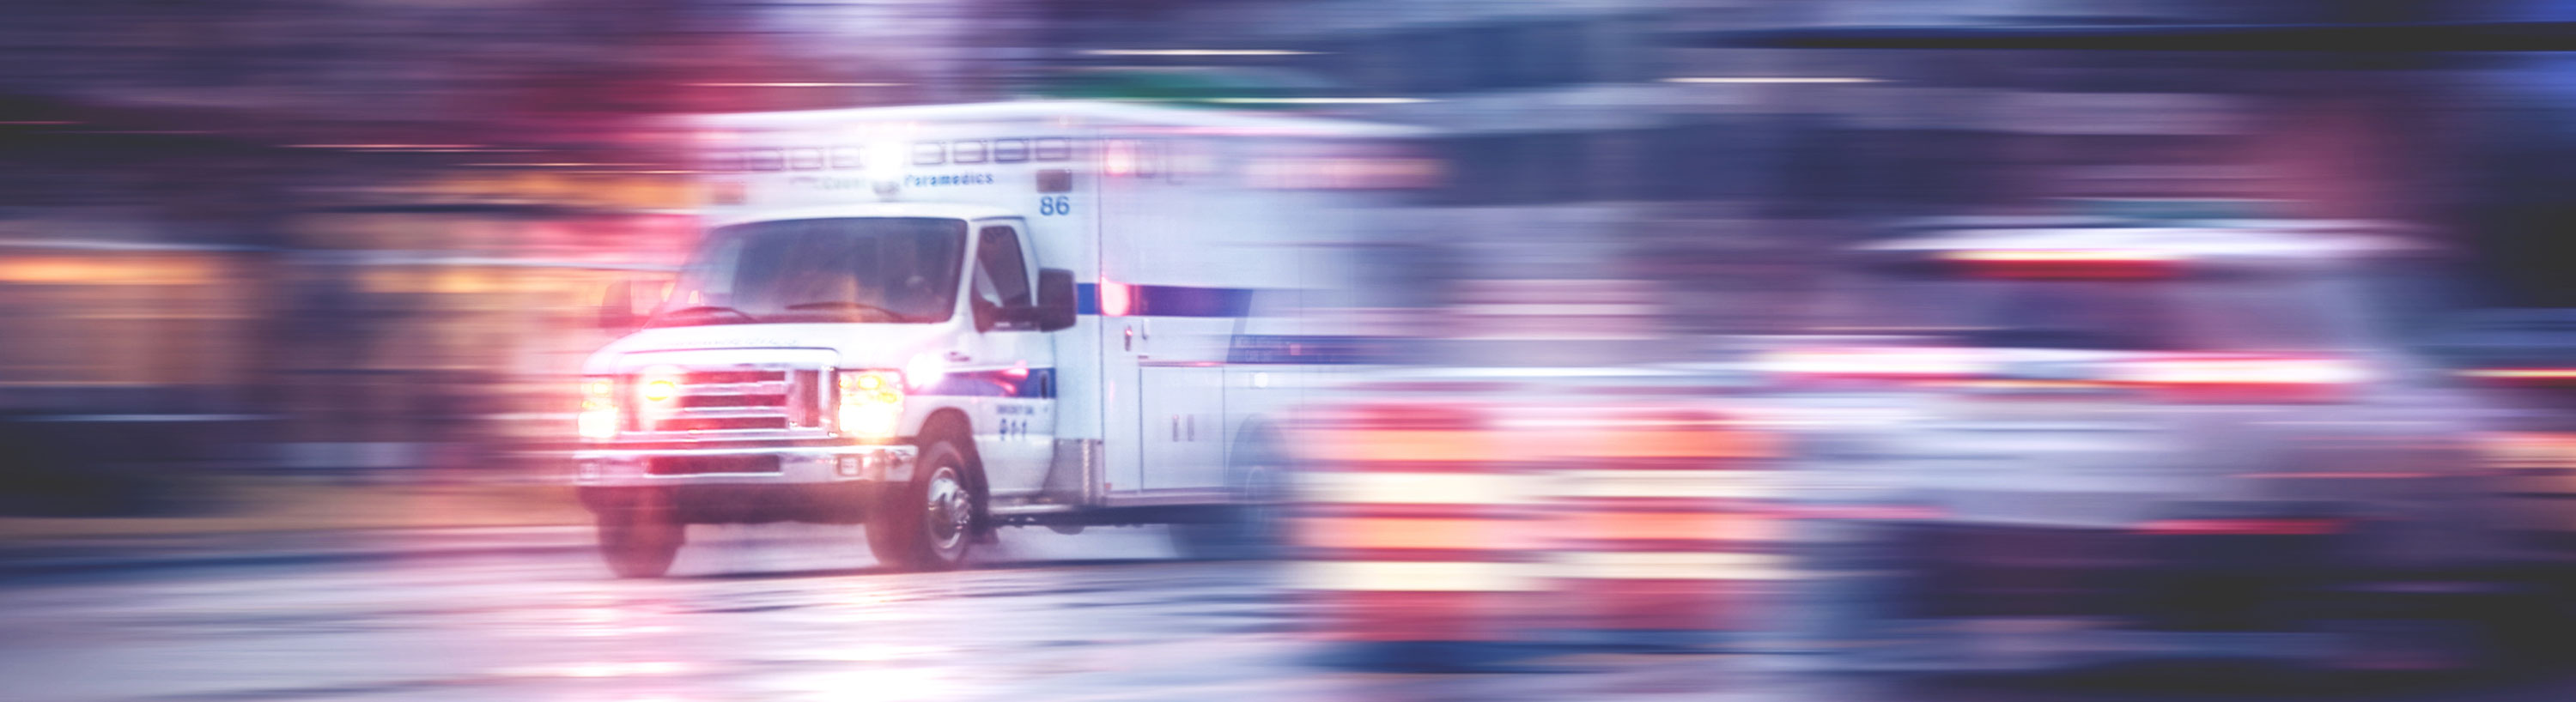 Banner picture of an ambulance in motion on the road with their lights on